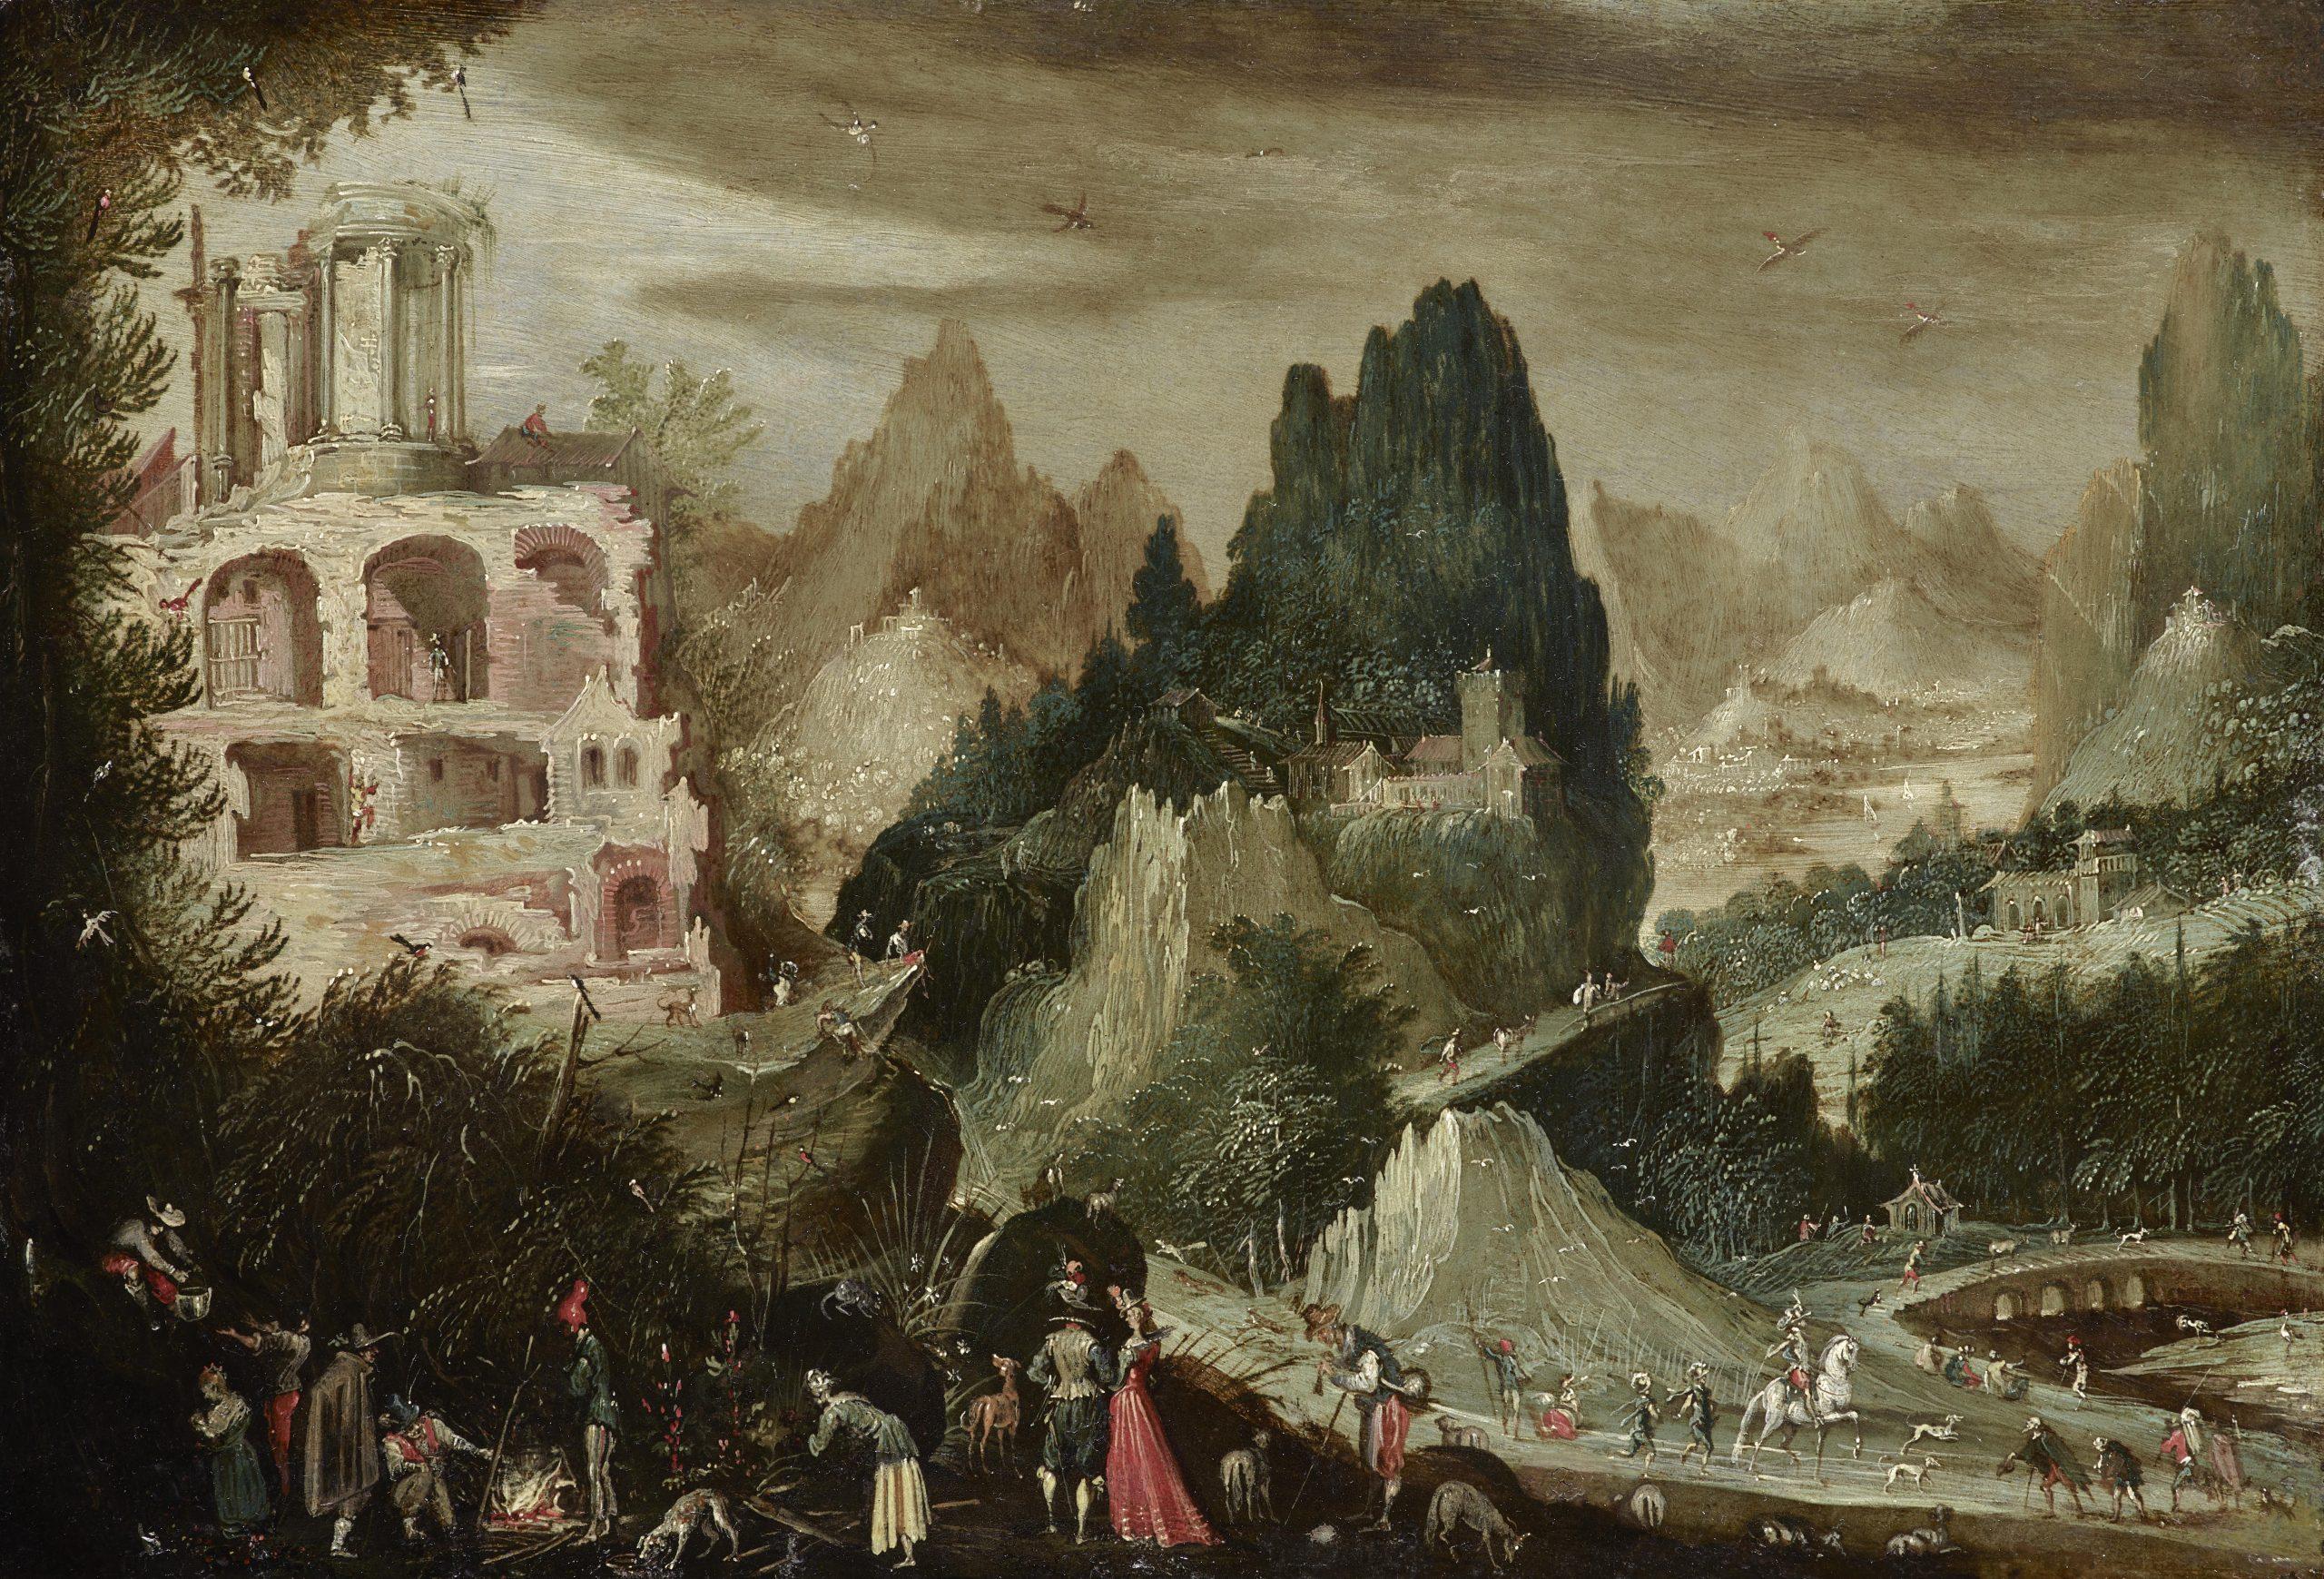 Flemish School, 17th Century Landscape Painting - Landscape with Ruins by the Tivoli Falls